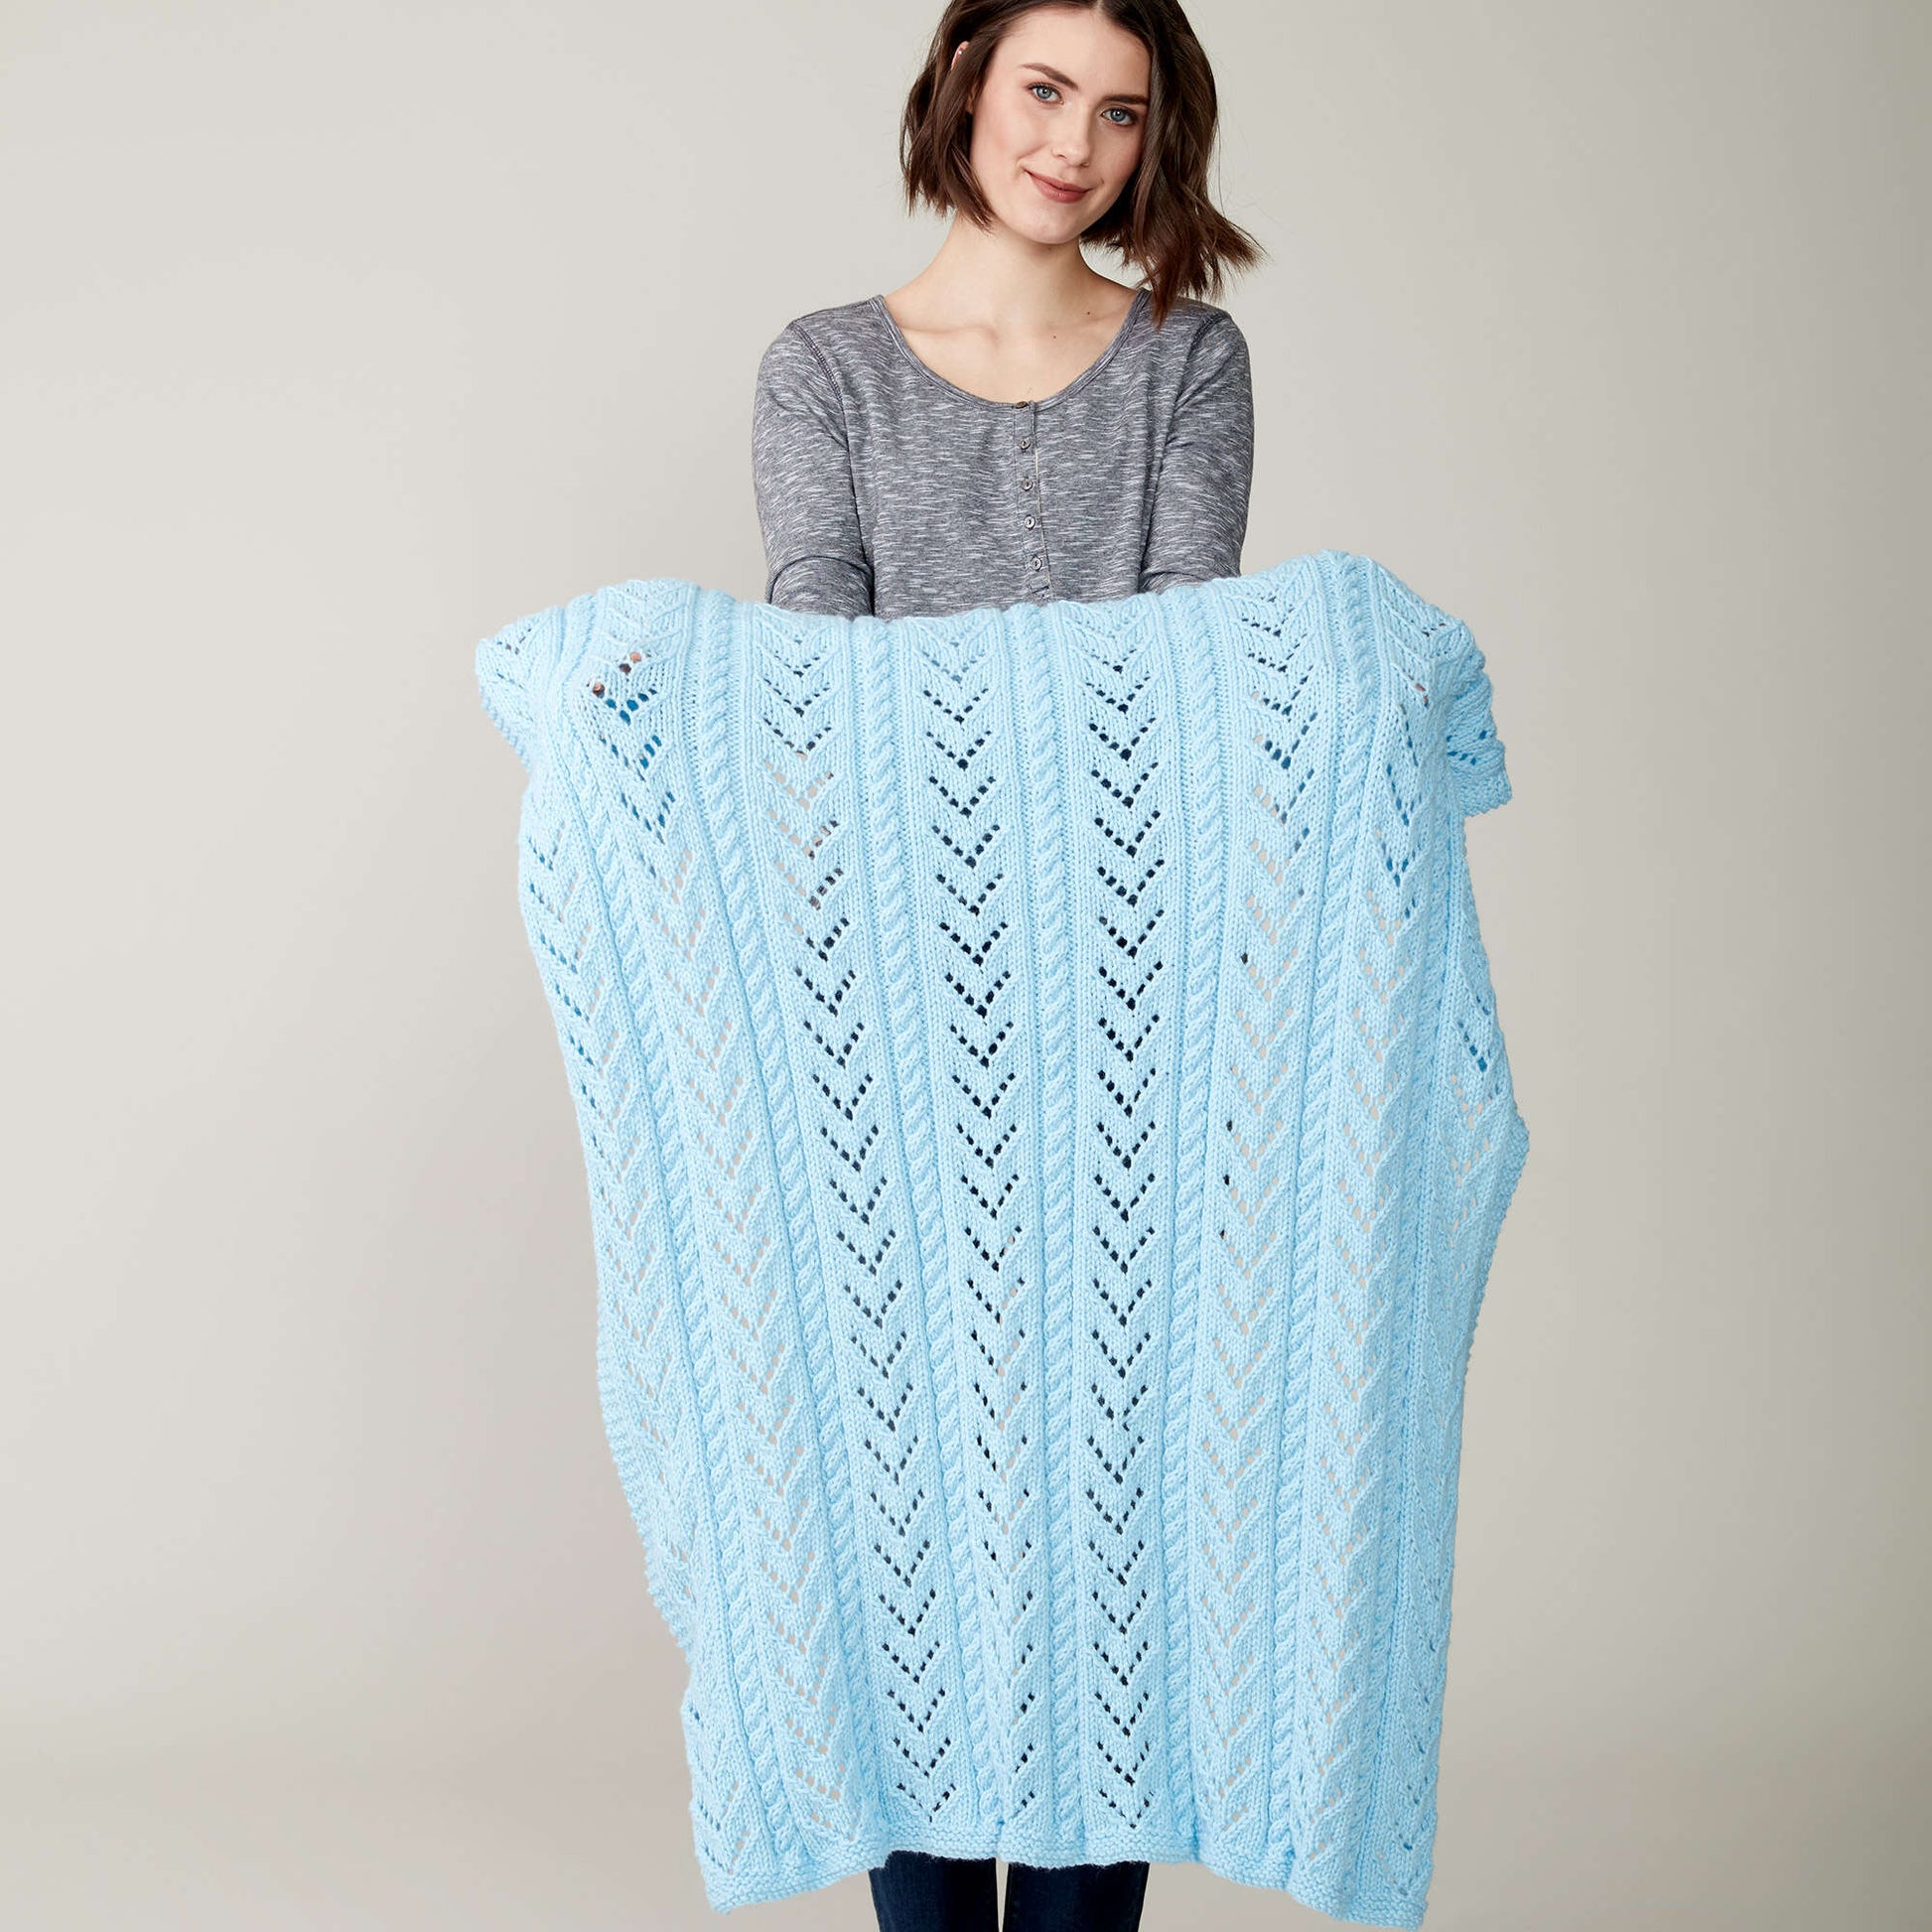 Free Caron Lace And Cables Knit Baby Blanket Pattern